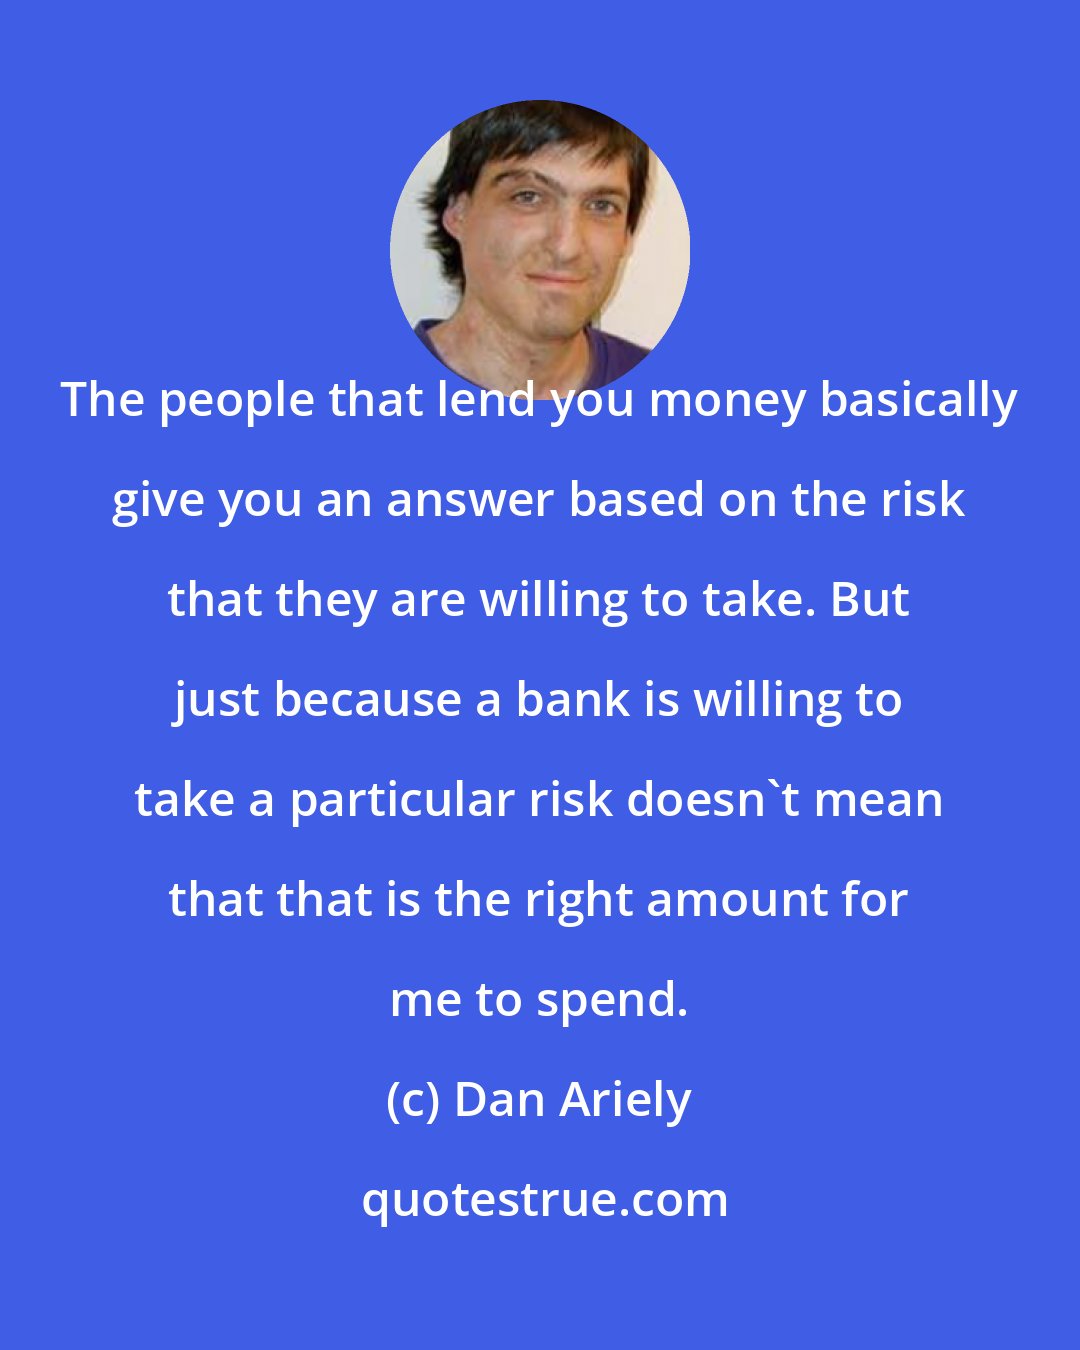 Dan Ariely: The people that lend you money basically give you an answer based on the risk that they are willing to take. But just because a bank is willing to take a particular risk doesn't mean that that is the right amount for me to spend.